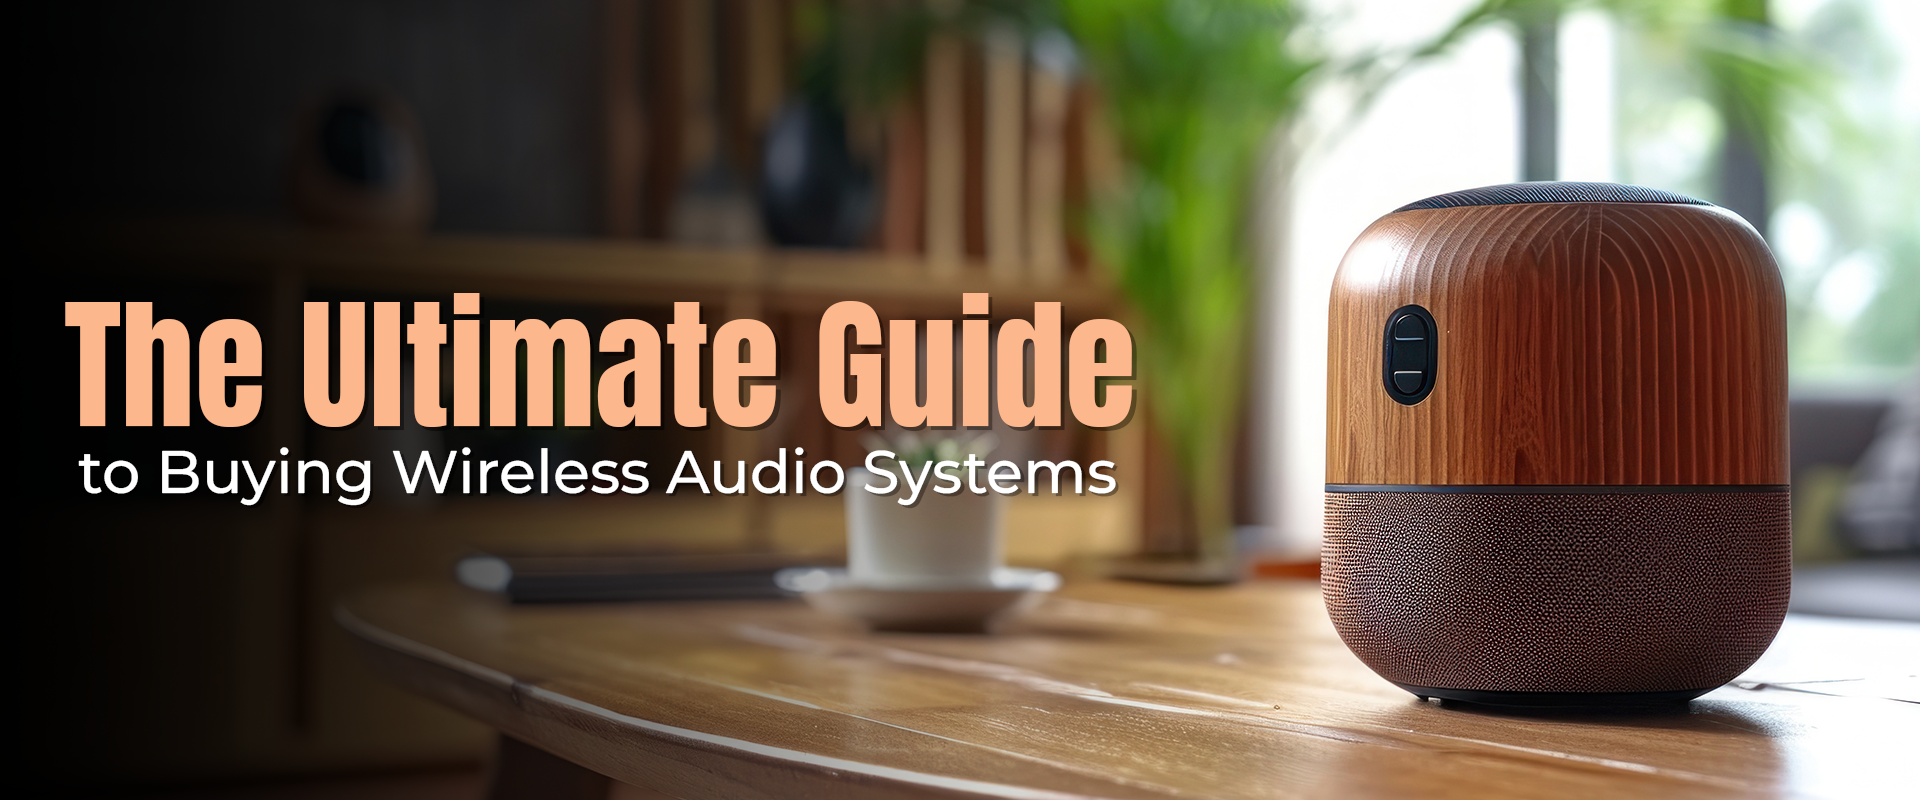 The Ultimate Guide to Buying Wireless Audio Systems